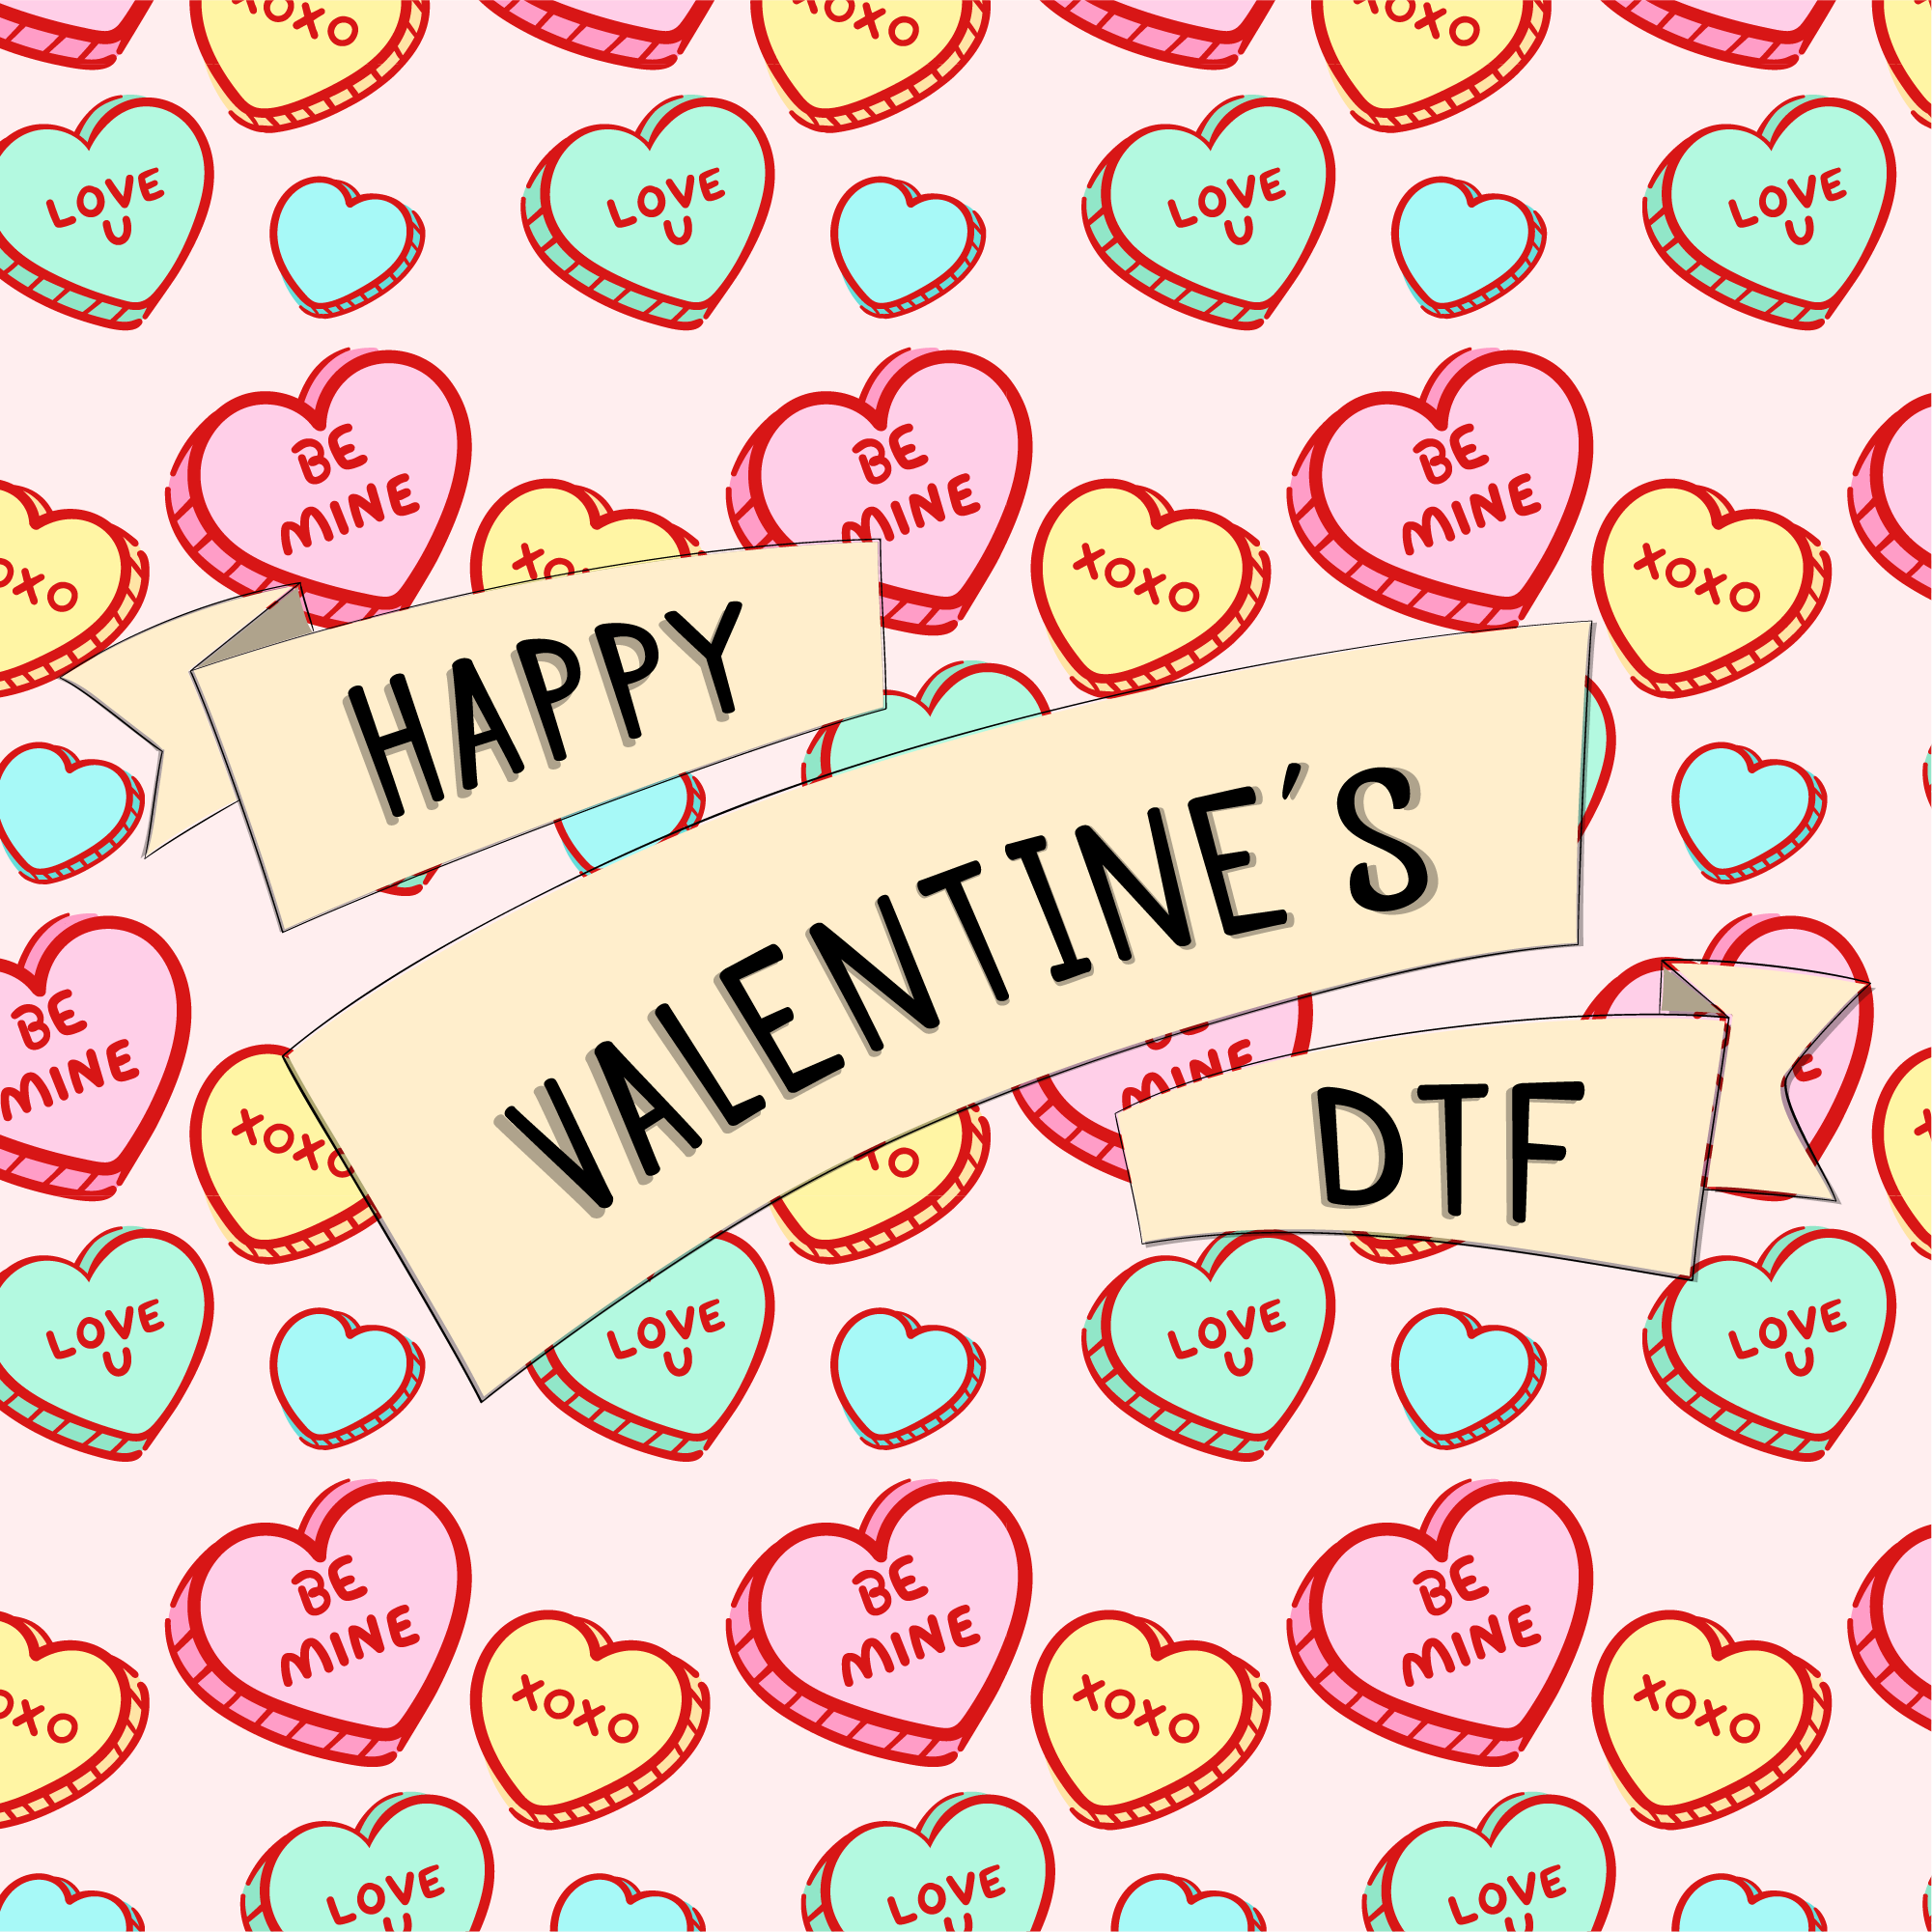 Valentine's Day DTF Transfers: Don't Miss Opportunity – Page 9 – dtfdallas